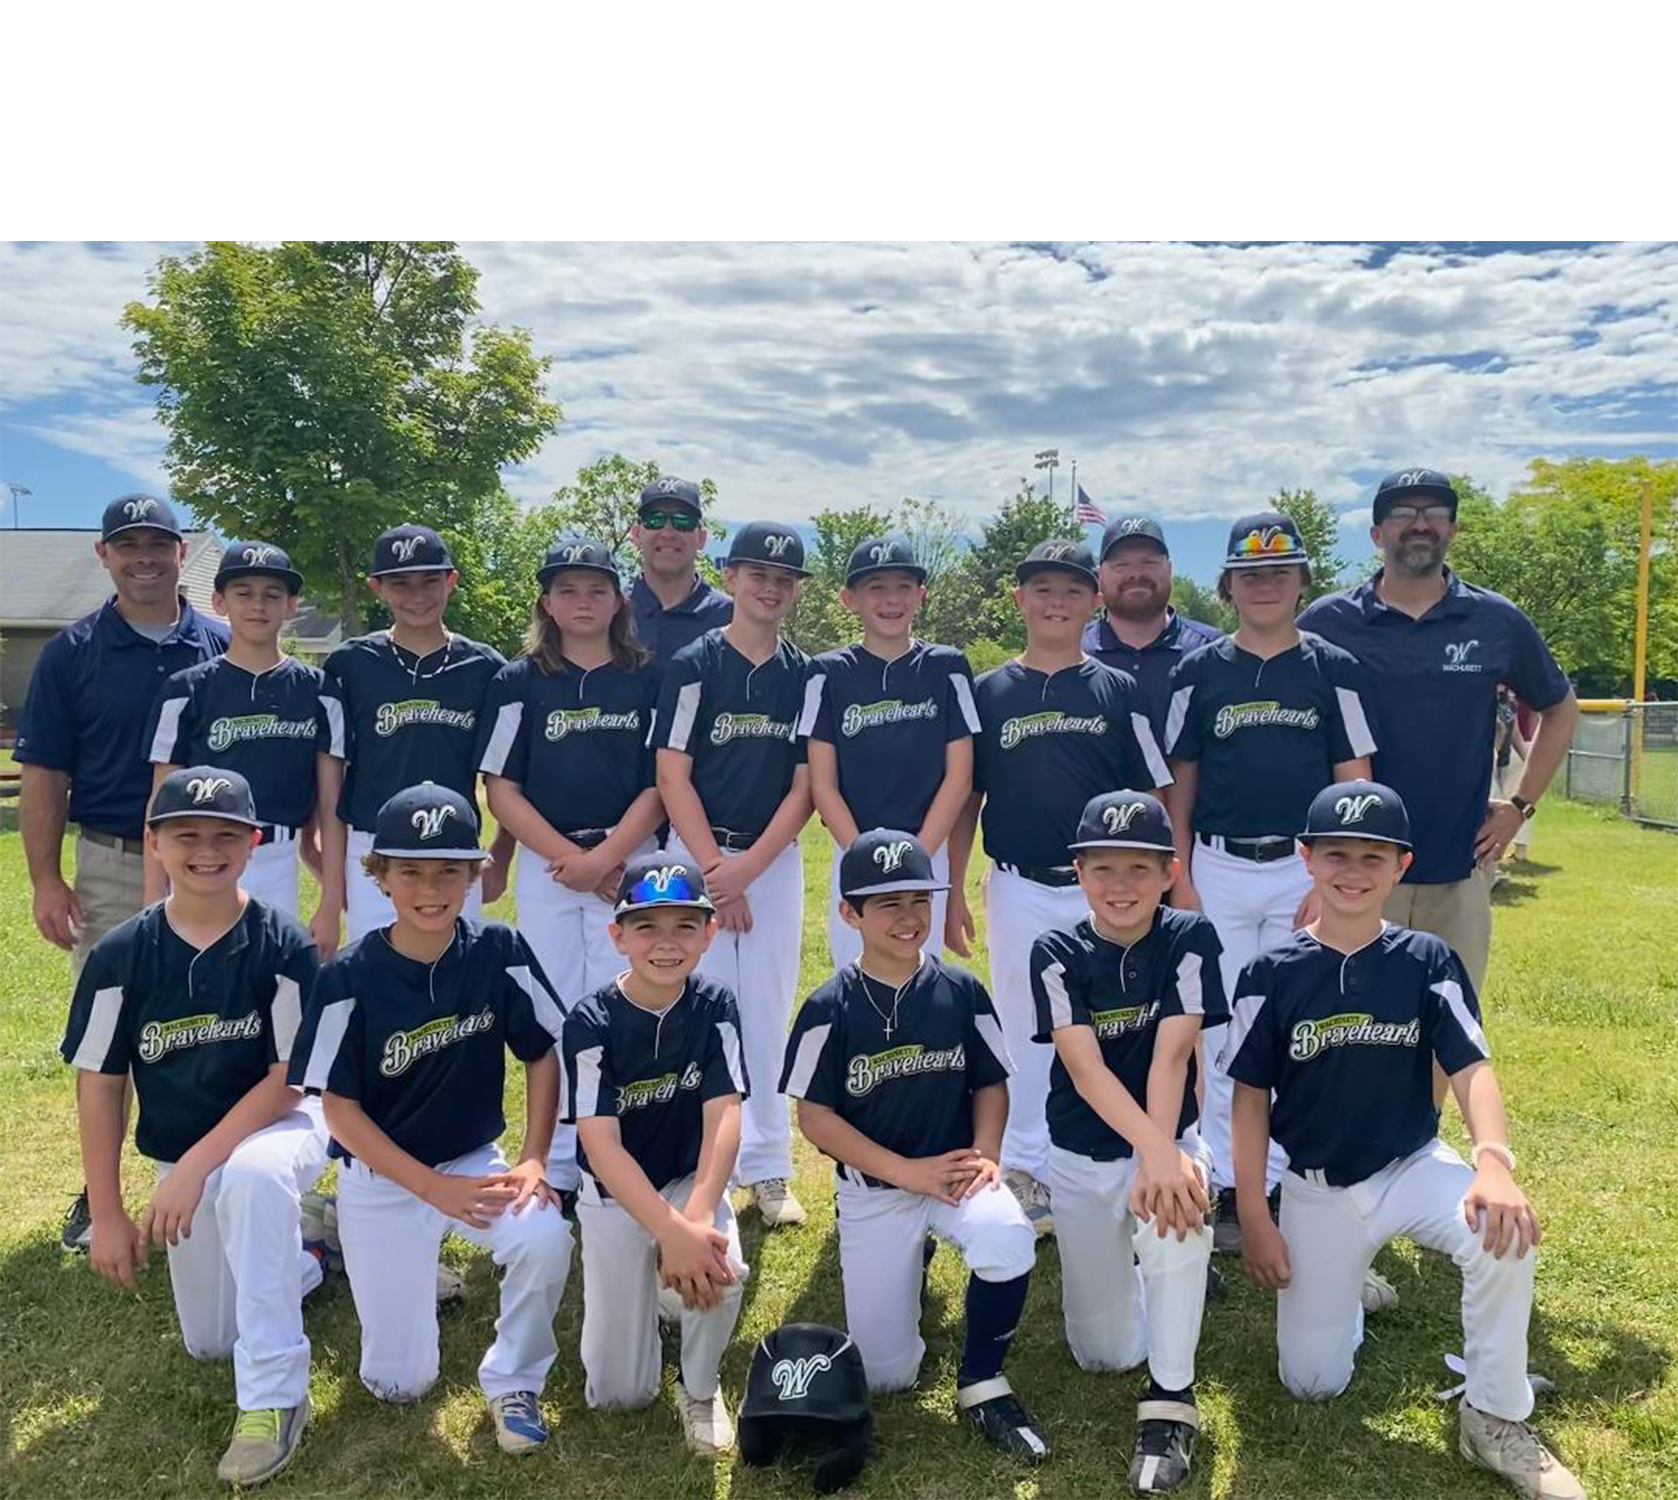 Wachusett Bravehearts Accepted To Cooperstown 12U Baseball Tournament